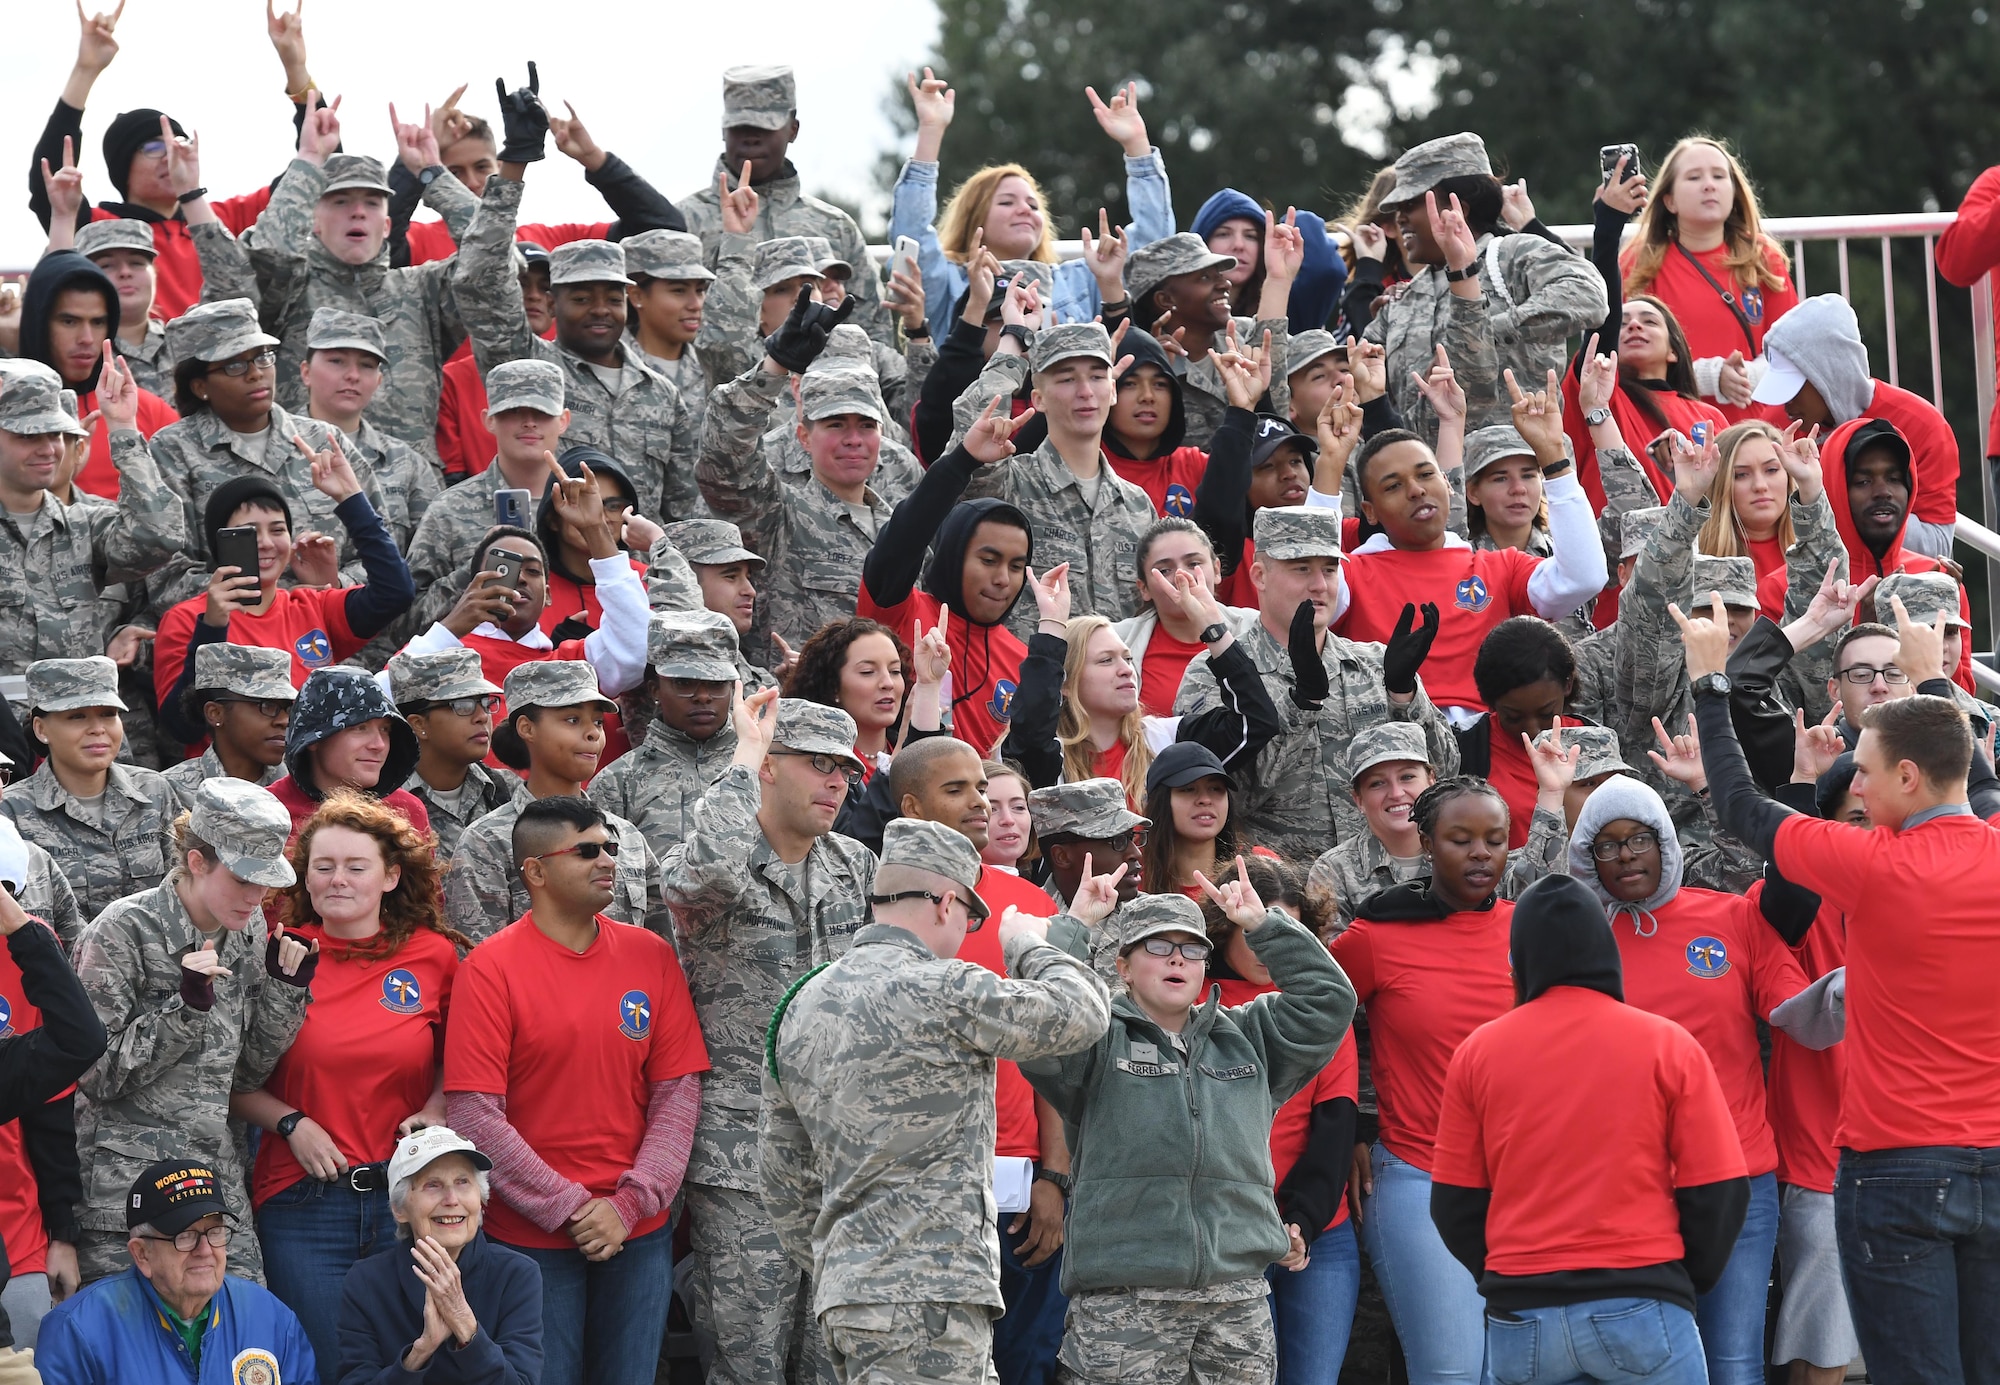 Members of the 335th Training Squadron display four fingers after being named the overall winner for the fourth quarter during the 81st Training Group drill down on the Levitow Training Support Facility drill pad at Keesler Air Force Base, Mississippi, Nov. 2, 2018. The 335th TRS "Bulls" also took first place for the year. (U.S. Air Force photo by Kemberly Groue)